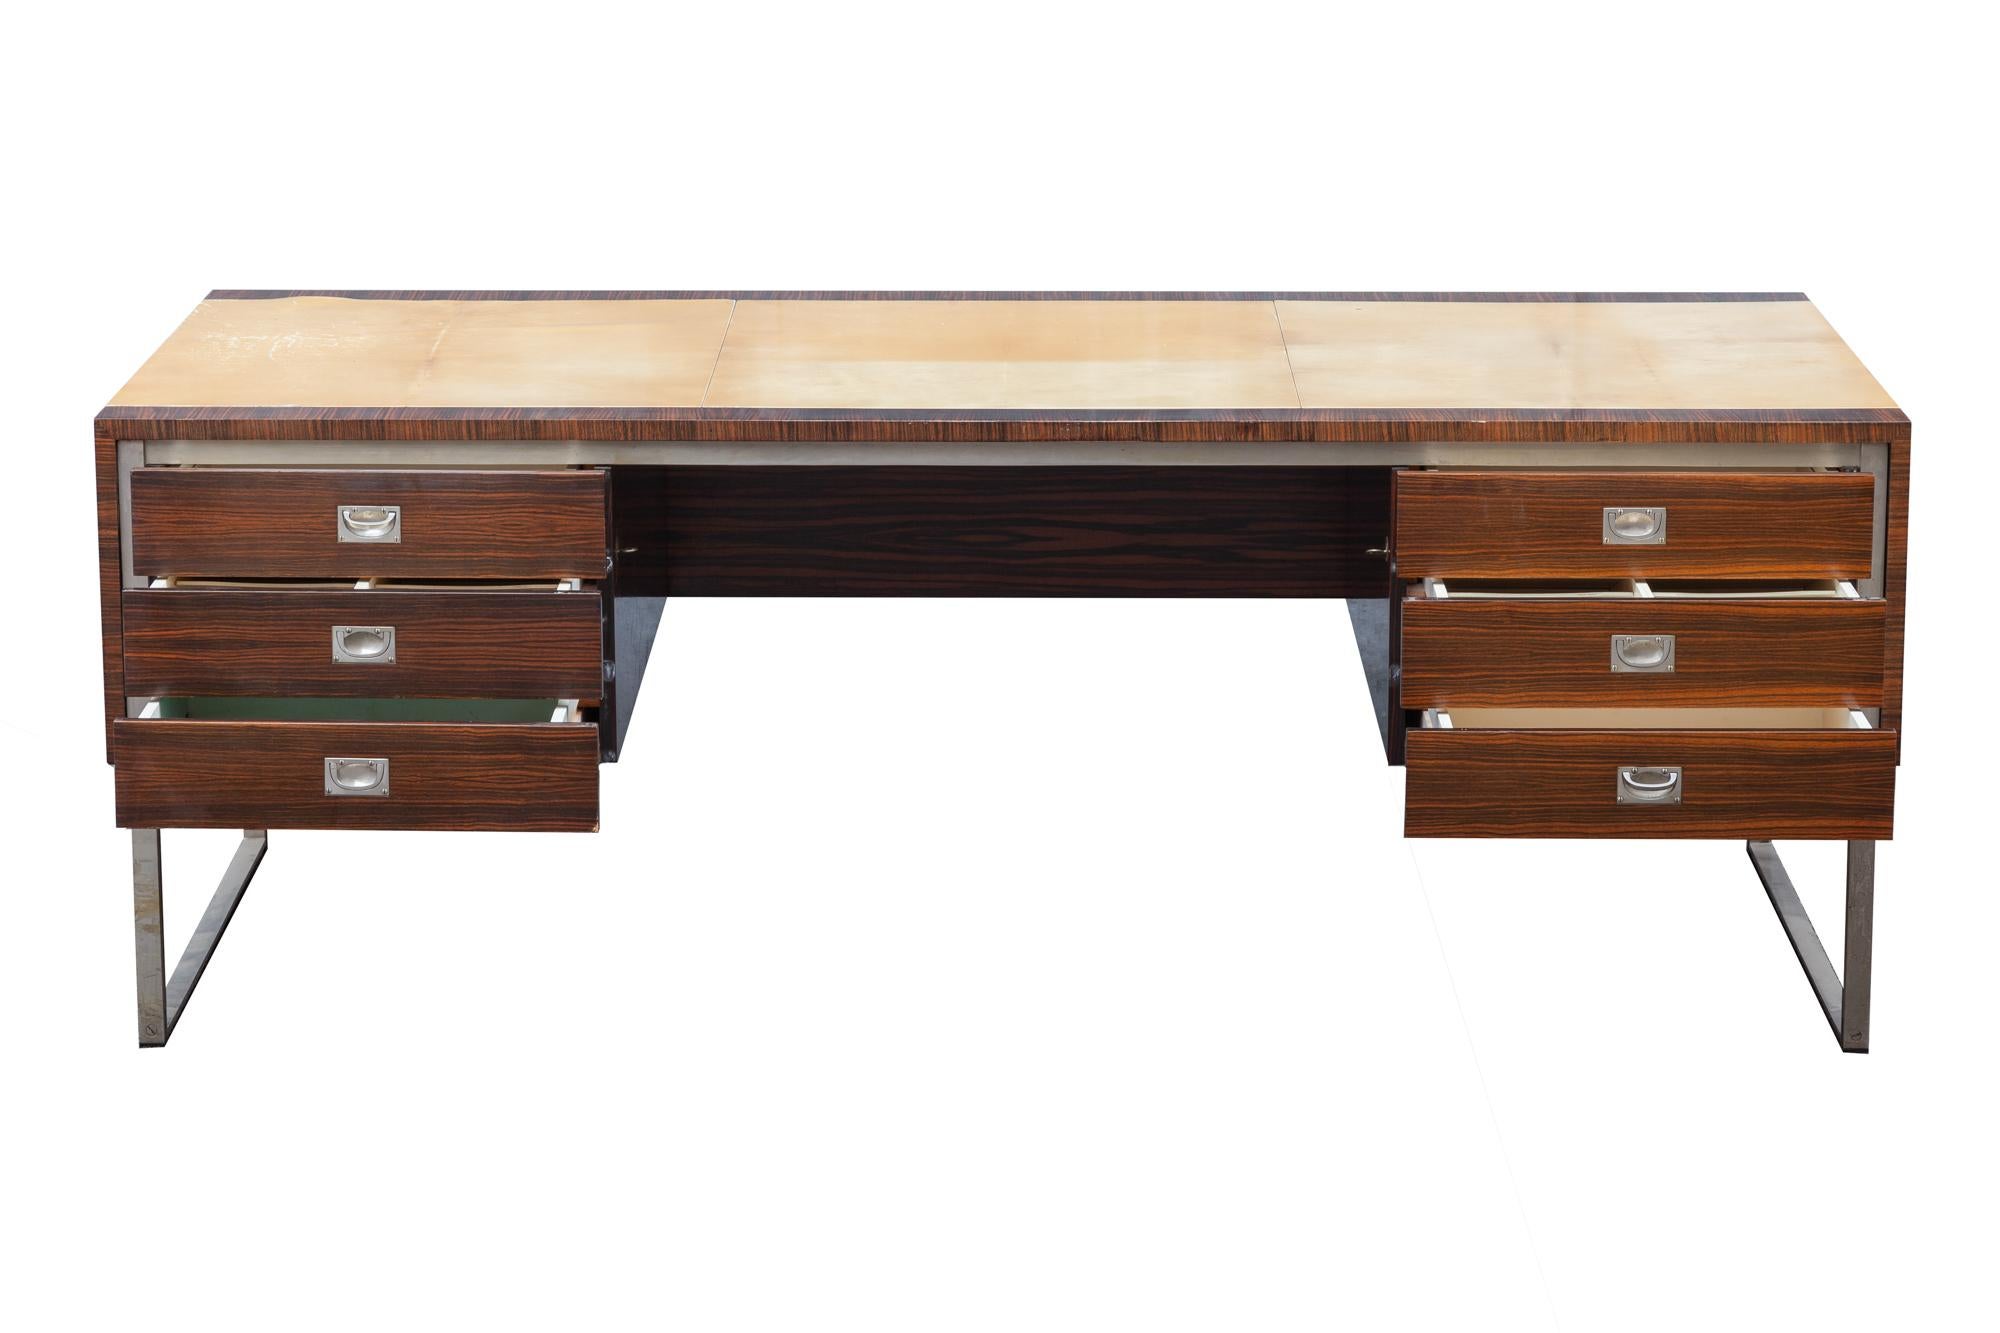 Vintage 1960s executive desk by De Coene, Belgium. Laminated tiger wood with parchment top. Glossy finish. Stainless steel chrome frame. 
Six locking drawers with organizational compartments for envelopes, pens etc.

Dimensions: 205 W x 74.5 H x 98